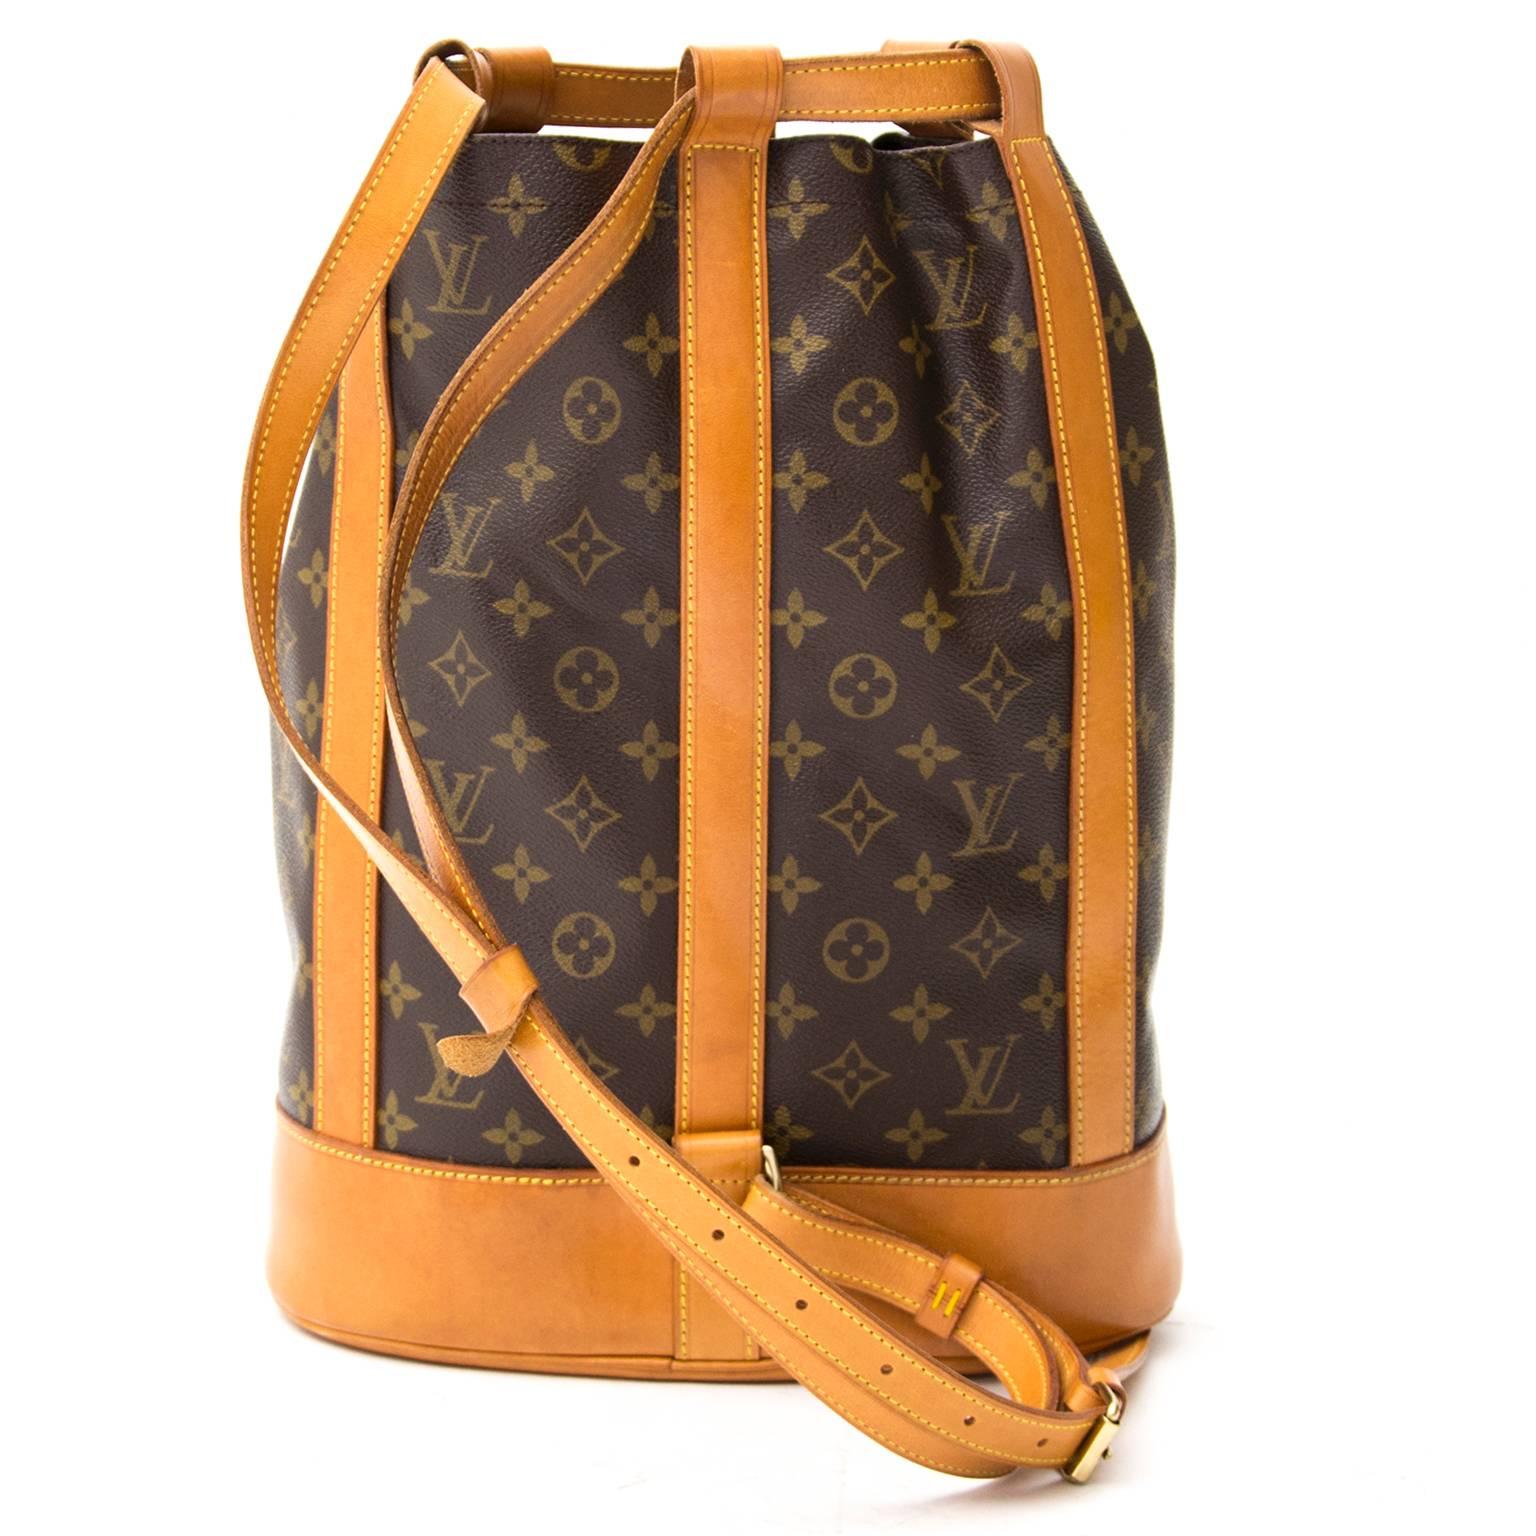 Louis Vuitton Noé in signature monogram with leather strap closure and gold-tone metallic hardware. Interior features a canvas lining and a clasp to attach your keychain. The shoulder strap with buckle is adjustable so the bag is easy to wear.  
